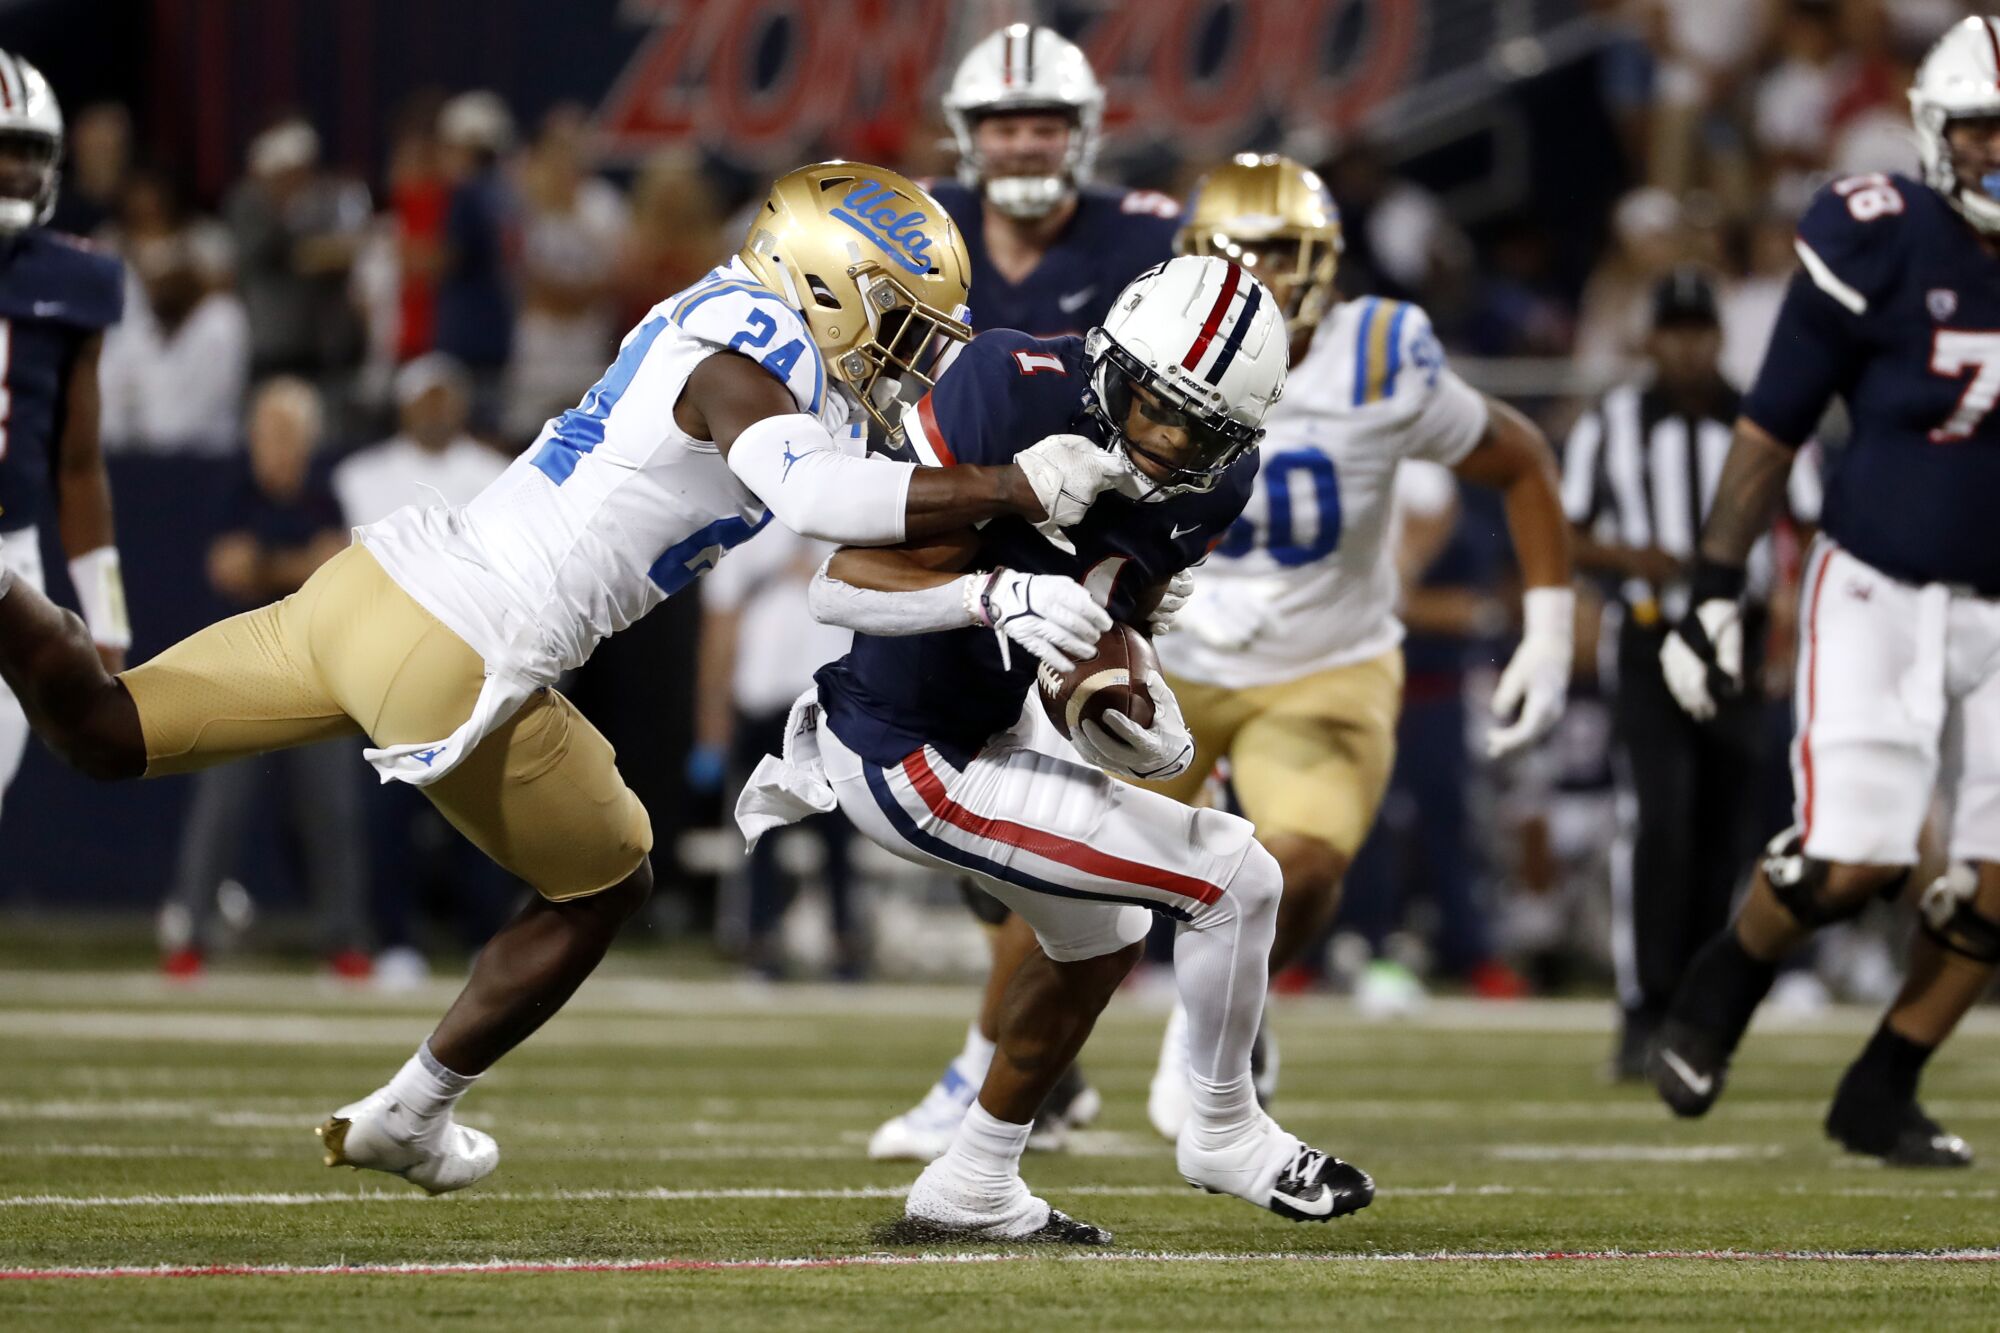 Arizona wide receiver Stanley Berryhill III is tackled by UCLA defensive back Qwuantrezz Knight 